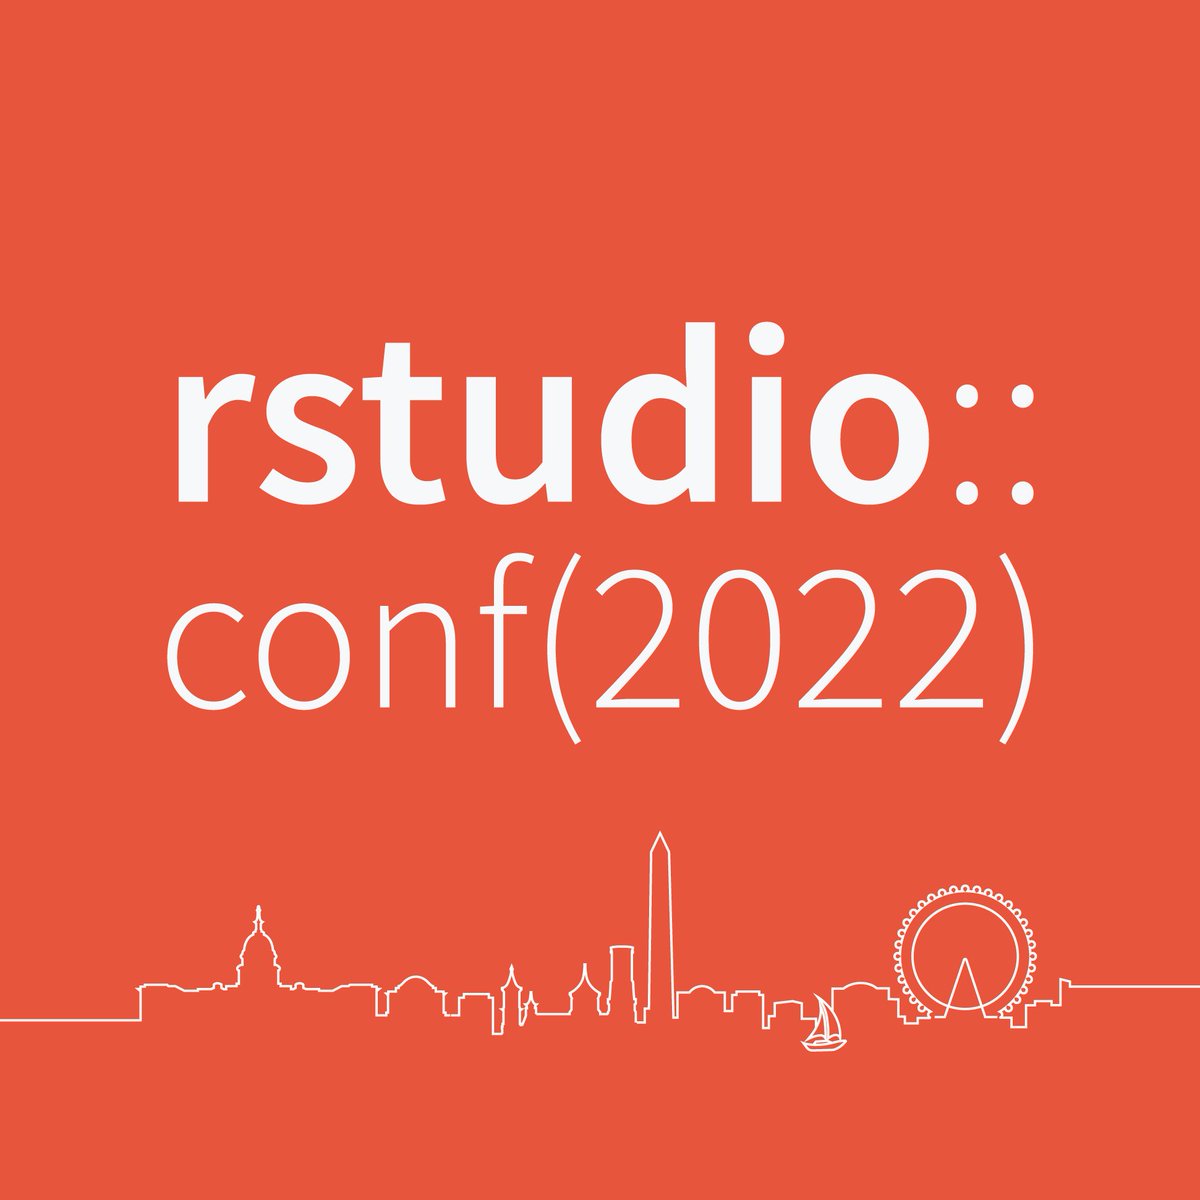 While we hope to see you in person at #rstudioconf, we want to include as many of you as possible. We invite you to join us virtually! 📺 We will livestream talks on the conference site. 📆 Get ready! Start adding to your calendar. See the schedule here: rstudio.com/conference/